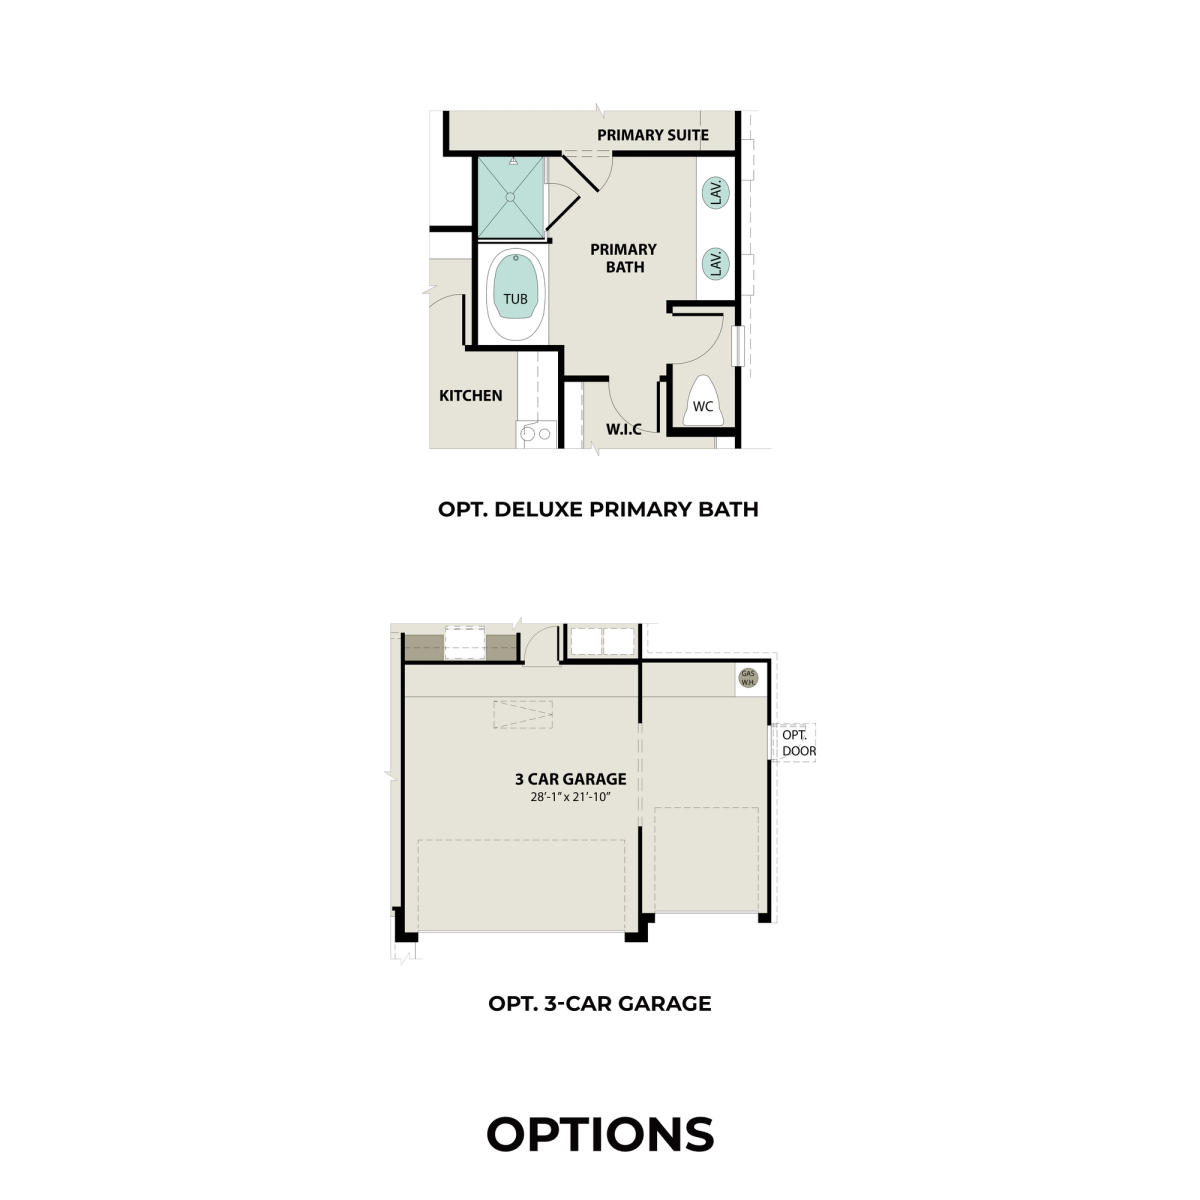 2 - The Laguna A buildable floor plan layout in Davidson Homes' Emberly community.